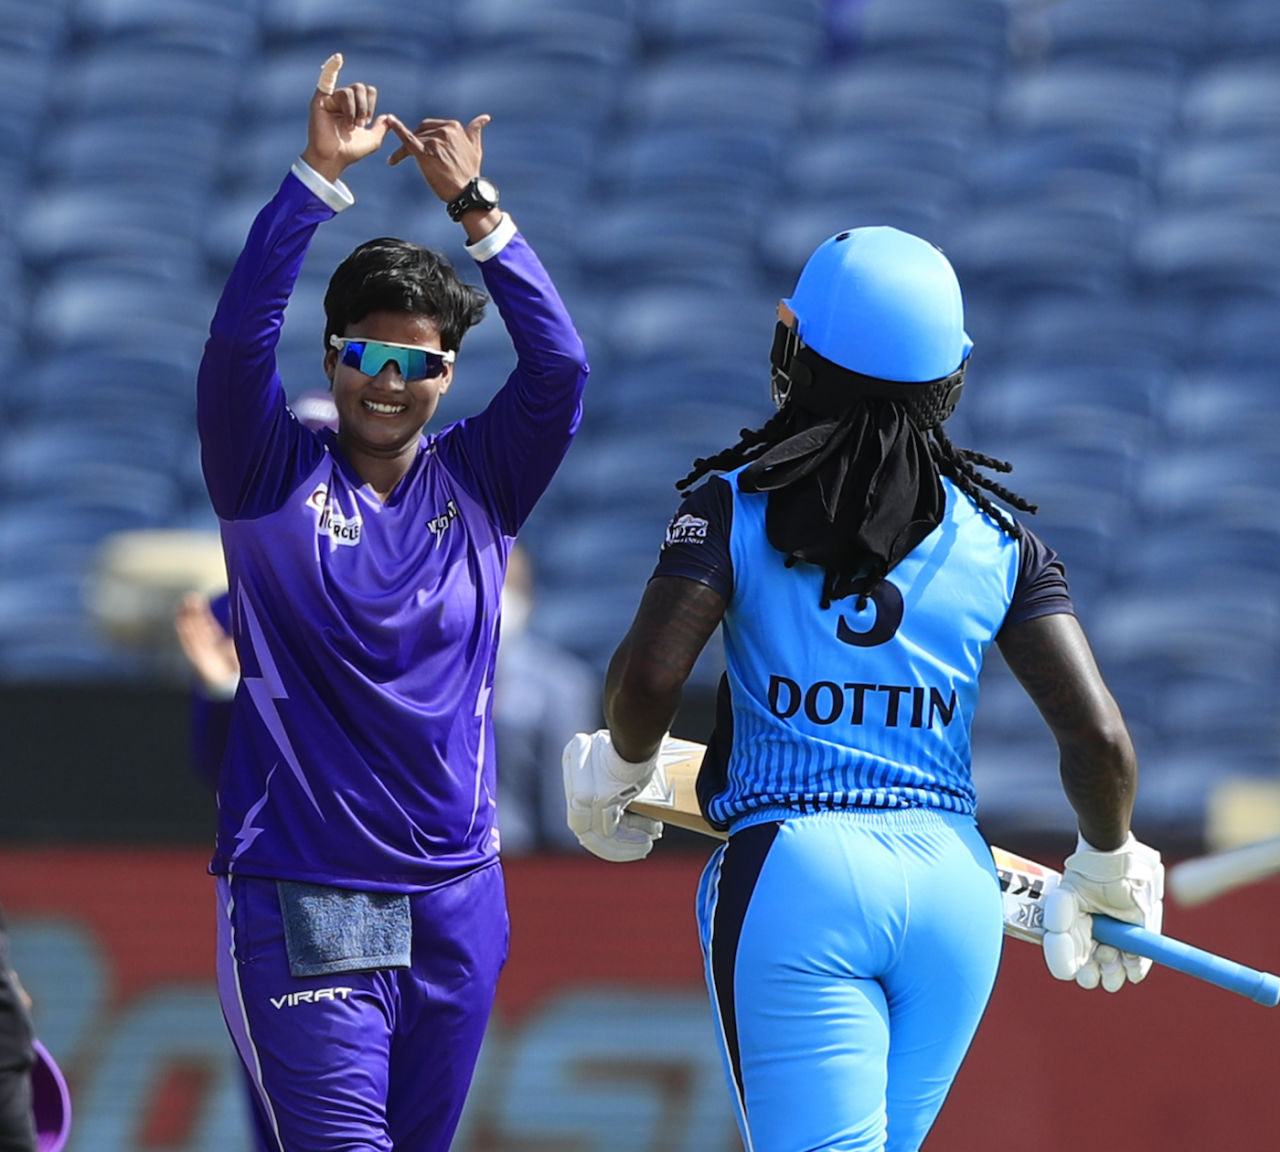 Deepti Sharma gets a chance to show off the Velocity celebration after dismissing Deandra Dottin, Supernovas vs Velocity, Women's T20 Challenge 2022, Pune, May 24, 2022